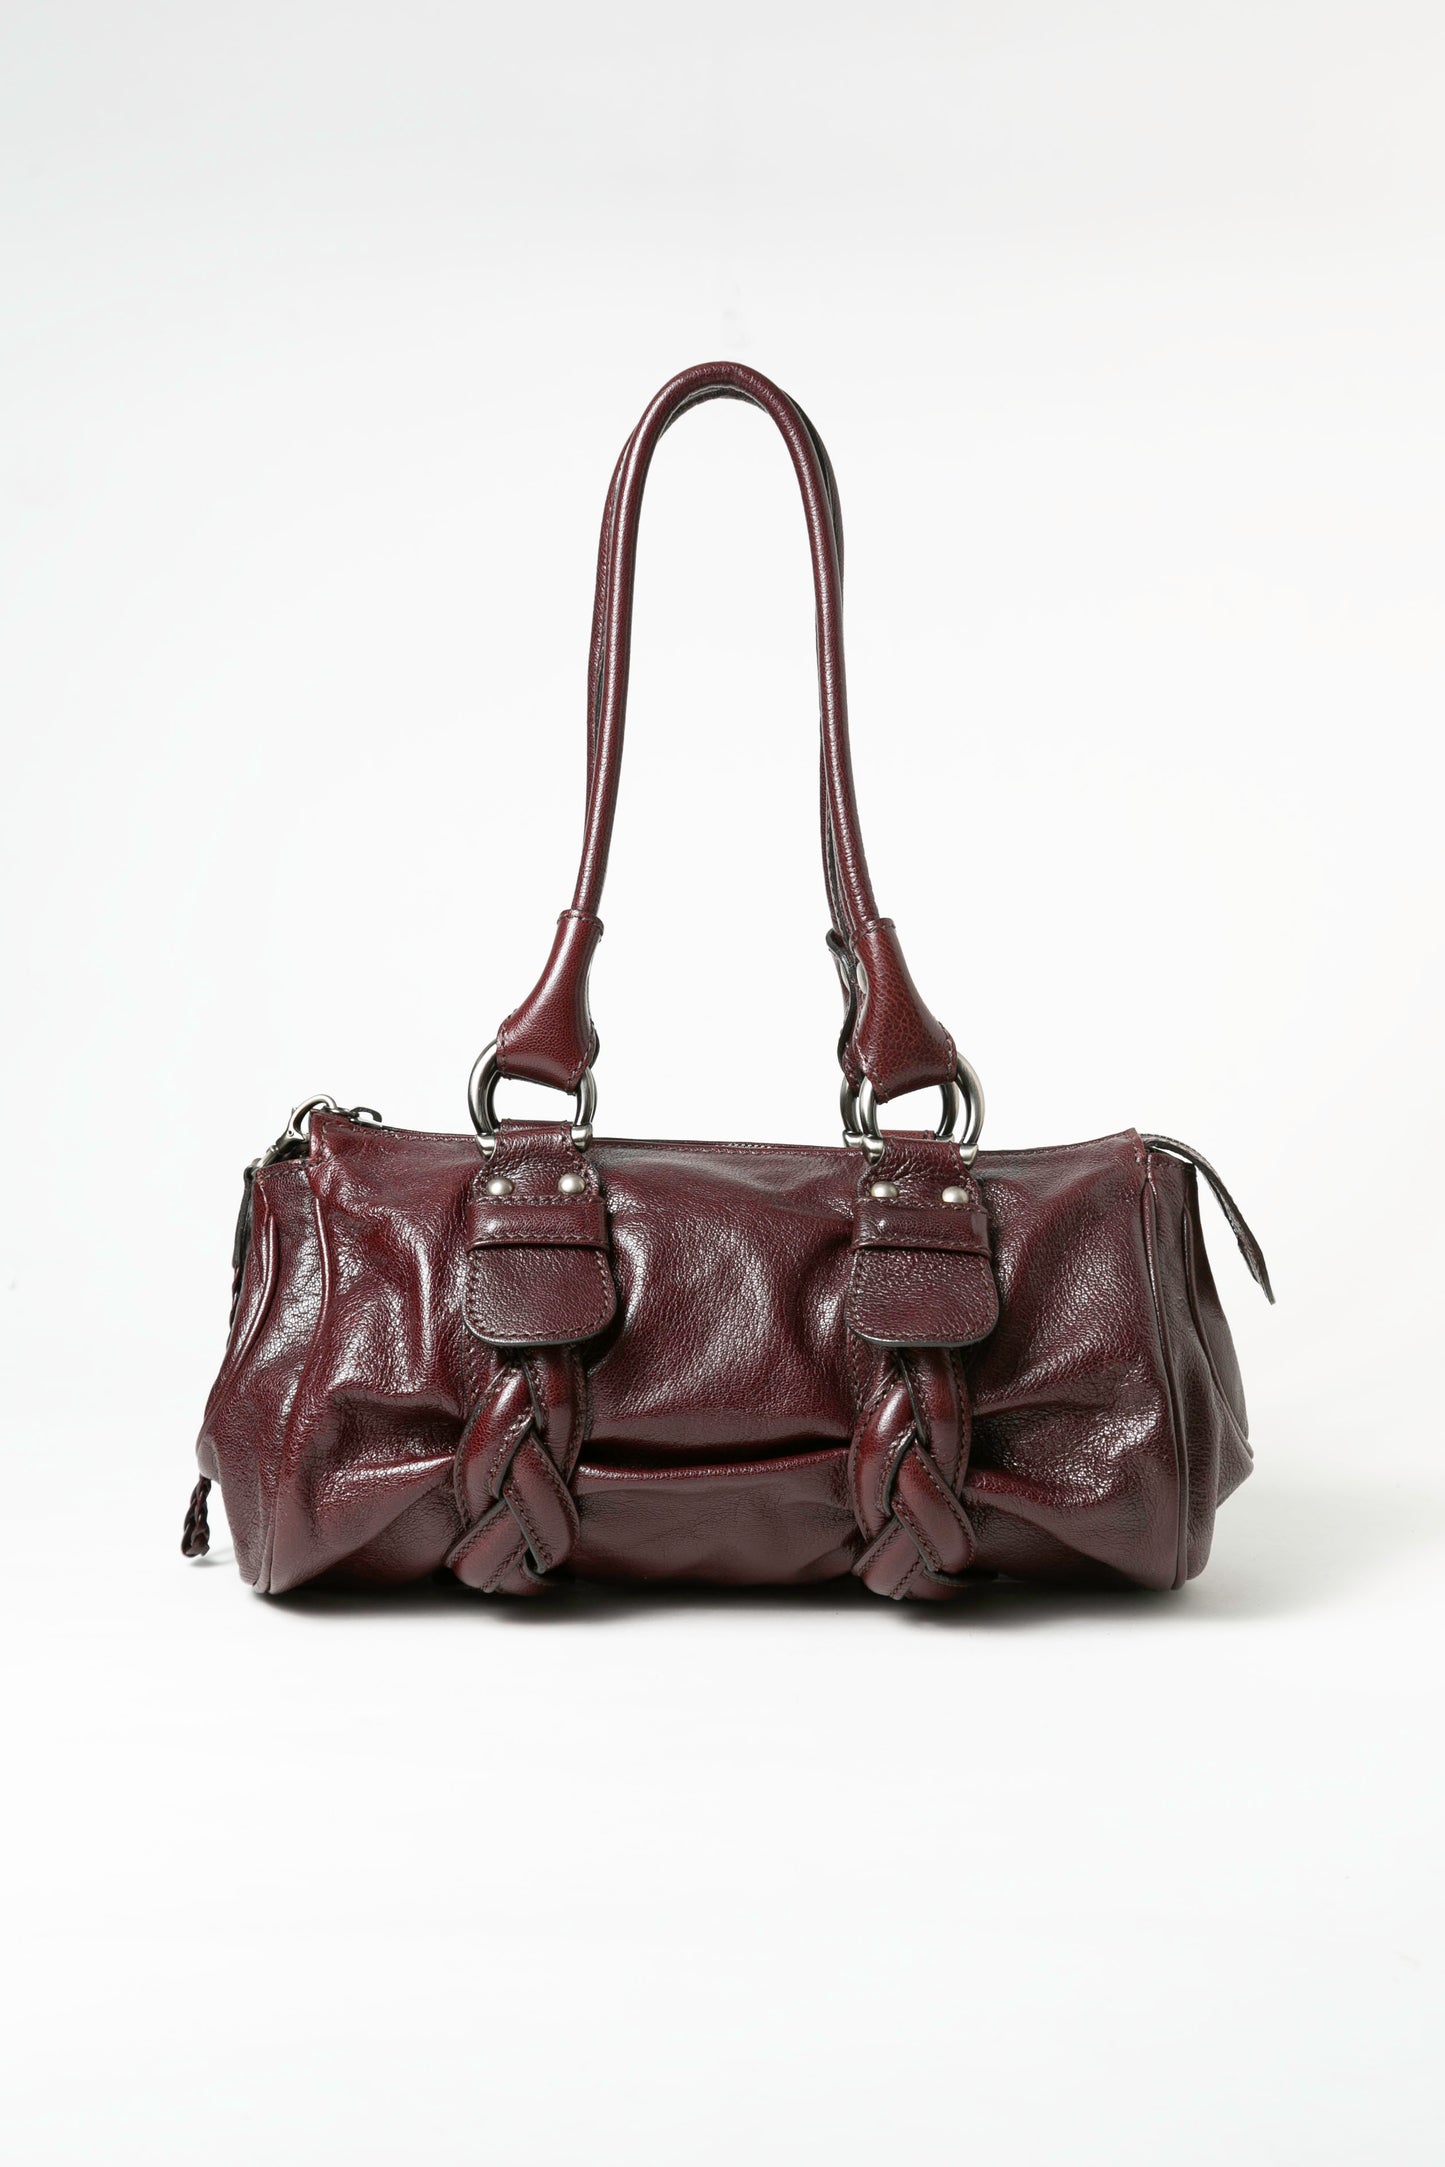 Coccinelle Merlot Red Leather Tote Bag